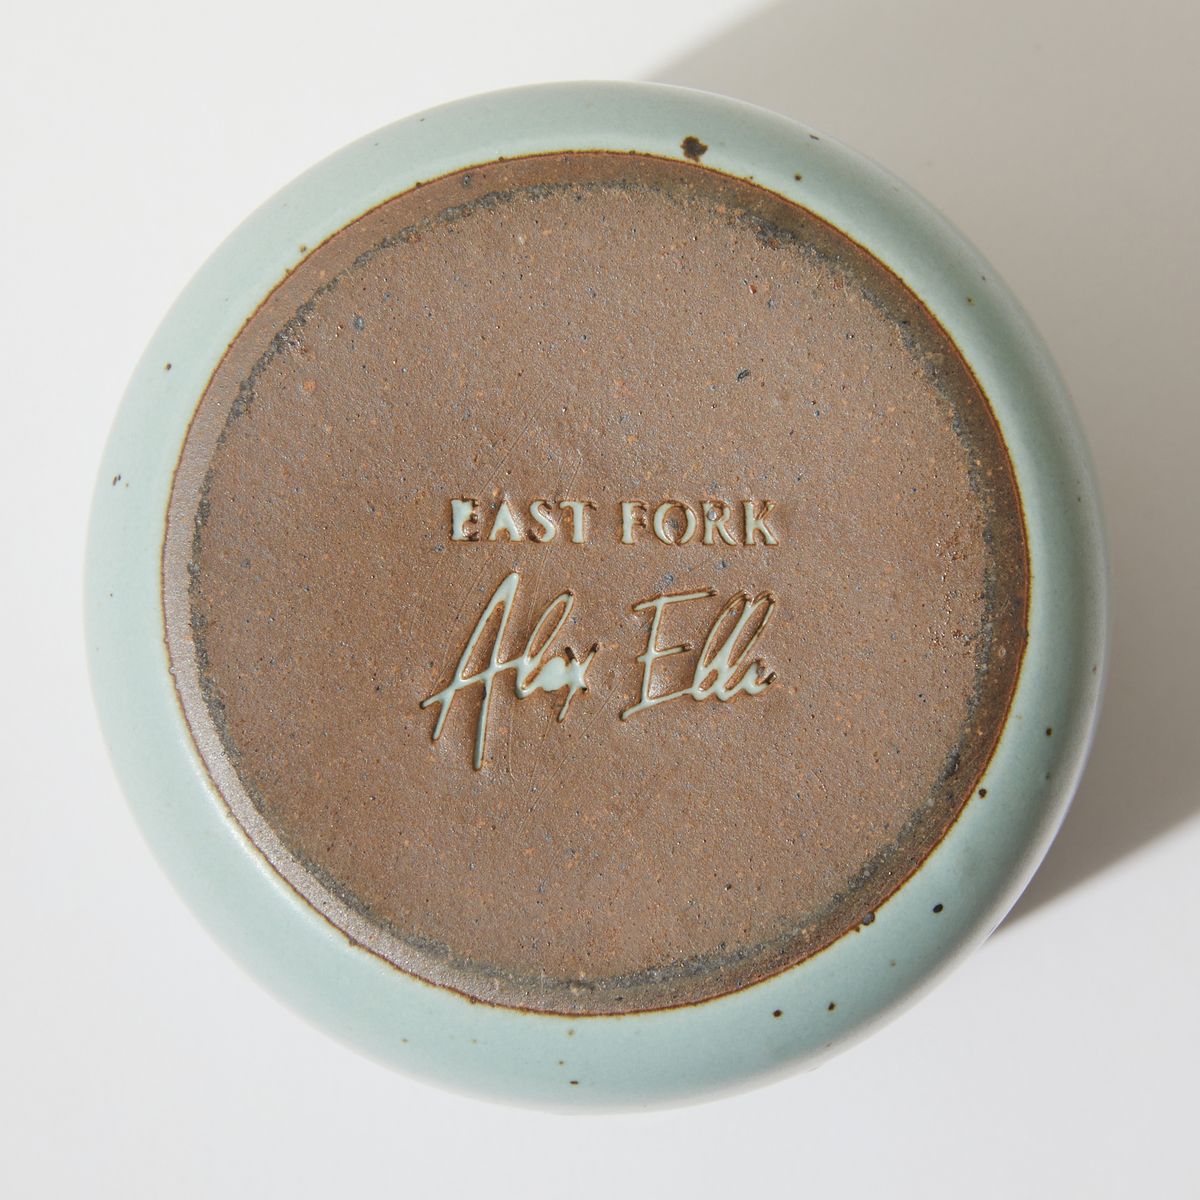 Bottom of the cup features raw unglazed rim with a stamp for "East Fork" and "Alex Elle"